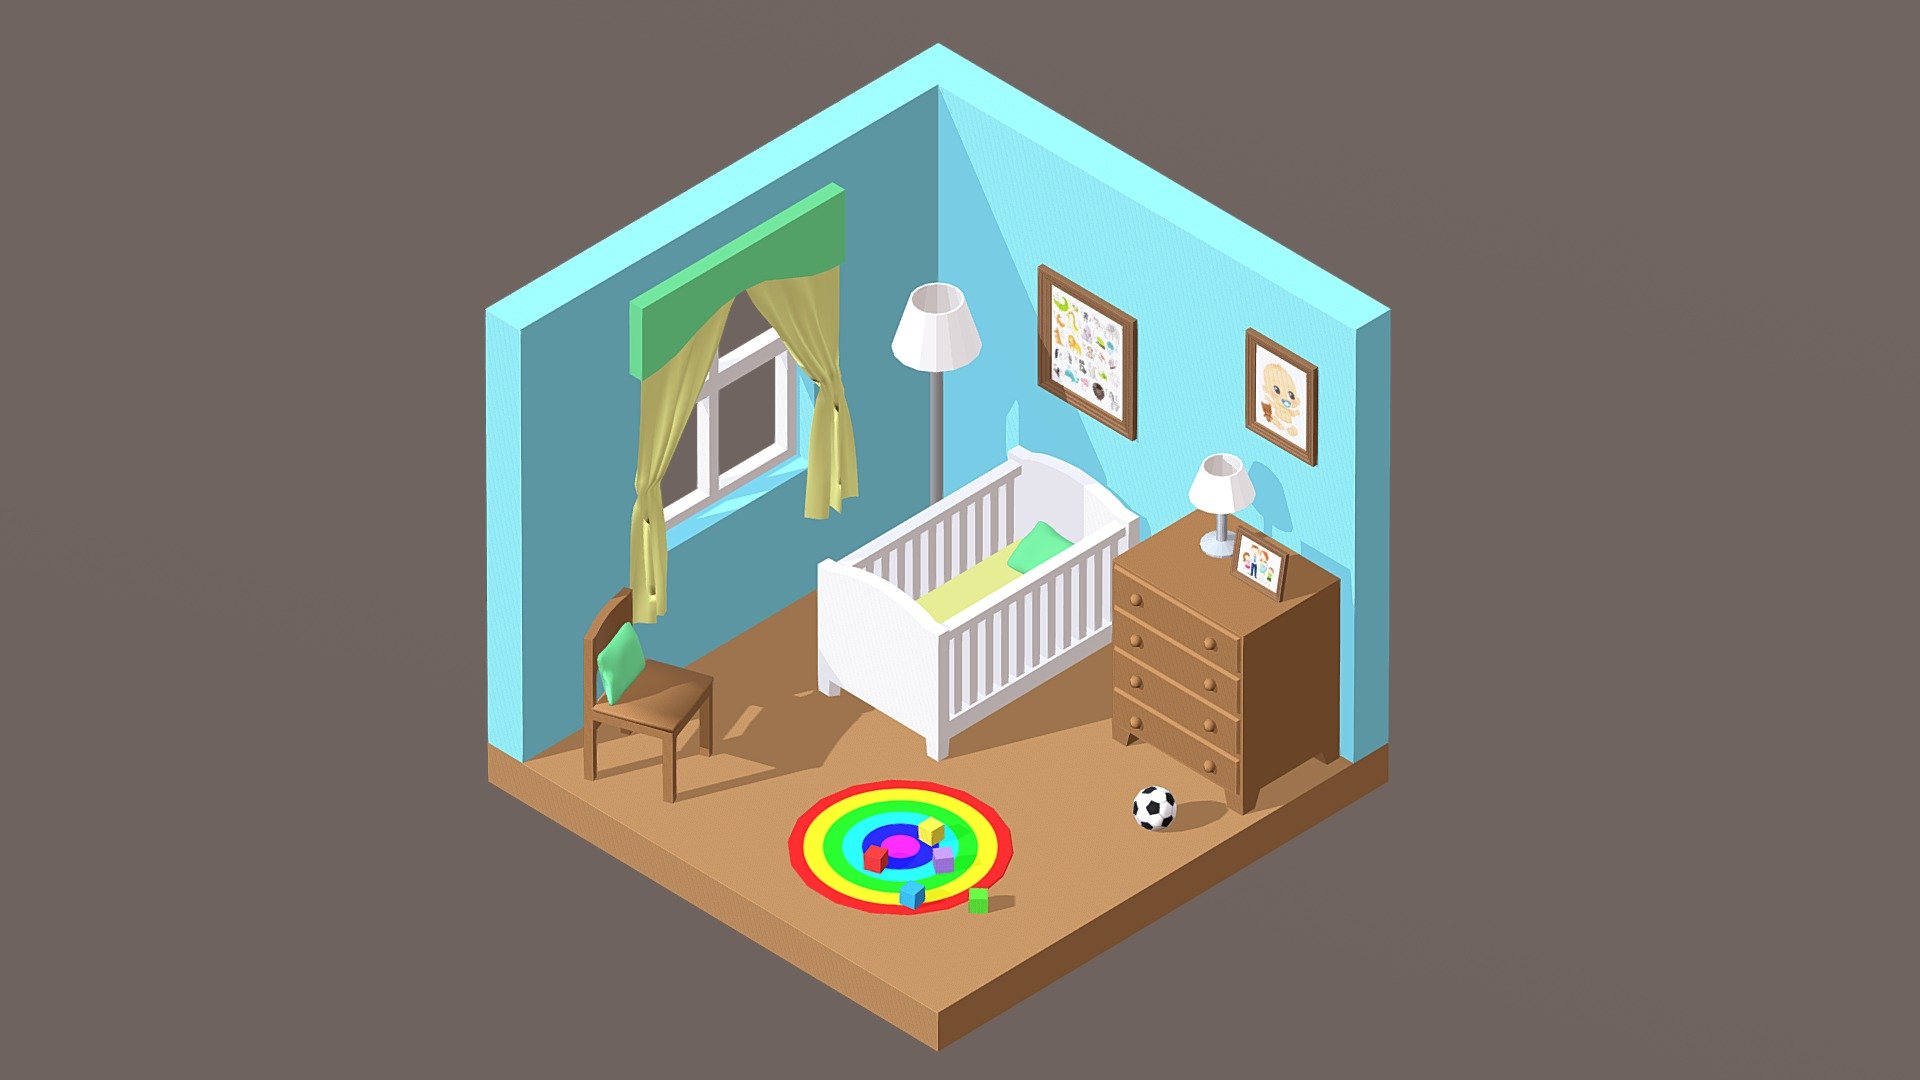 Daytime version of the baby room scene from Diaper Dash, a prototype co-op game which utilises an alt controller.

Mostly low poly assets used apart from the cushions and curtains 3d model